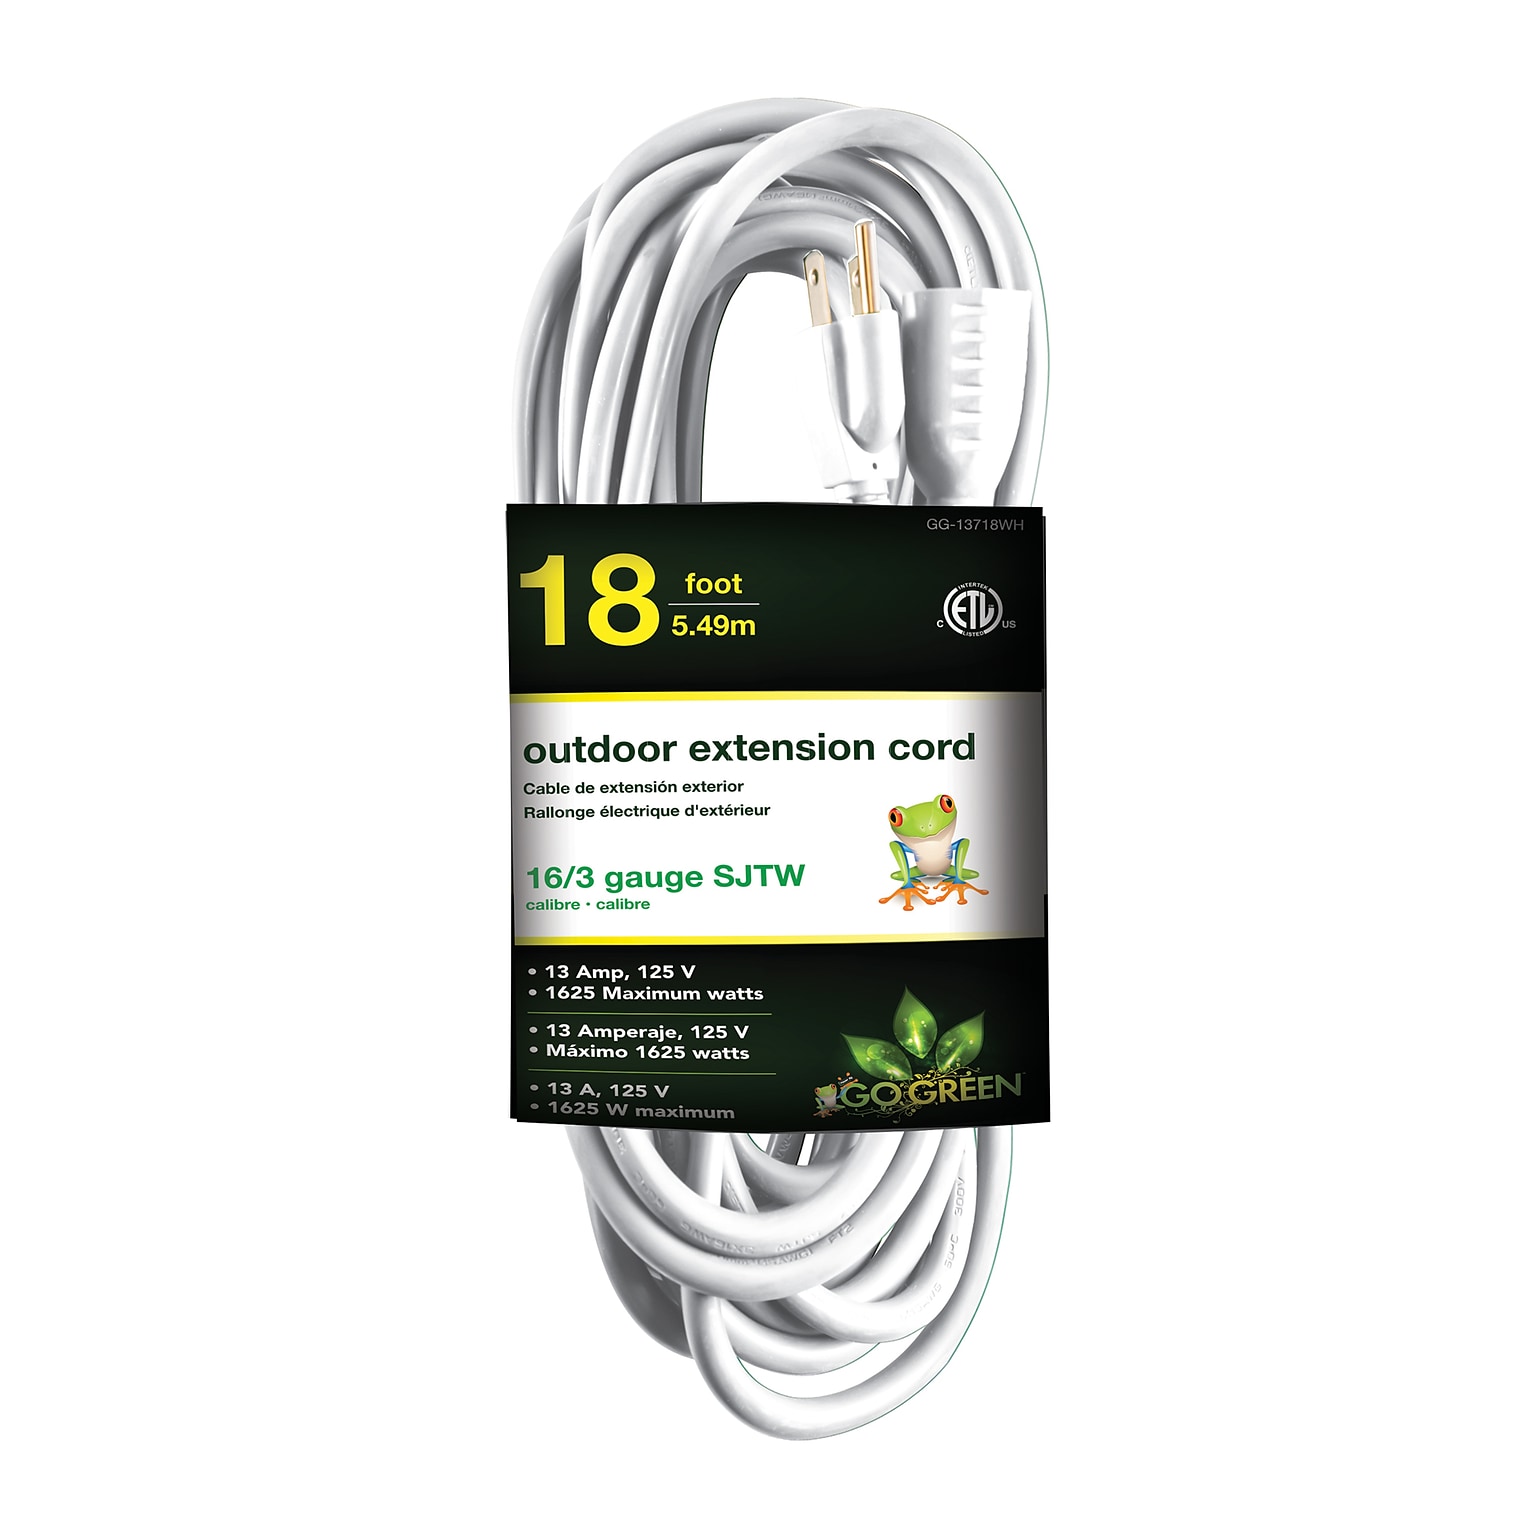 GoGreen Power 16/3 18 Heavy Duty Extension Cord (GG-13718WH)